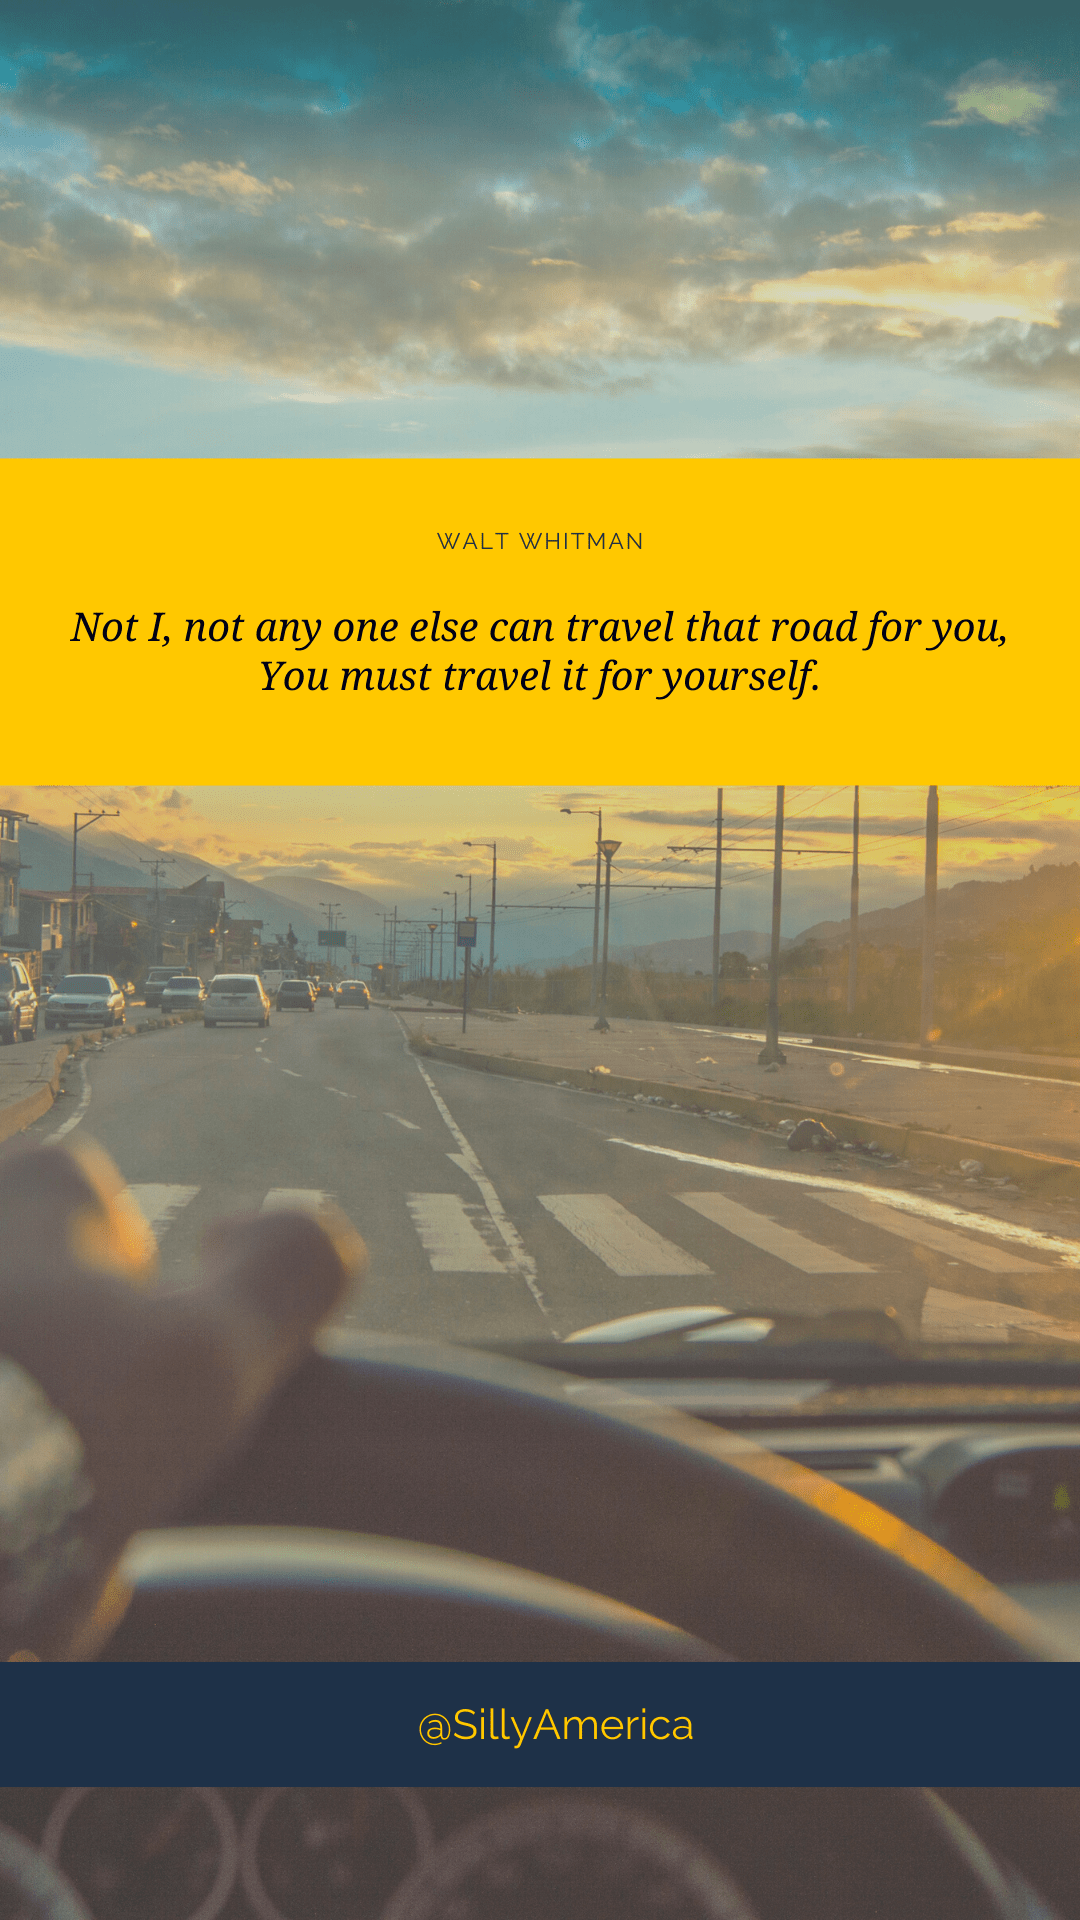 “Not I, not any one else can travel that road for you, You must travel it for yourself.”
Walt Whitman, Song of Myself